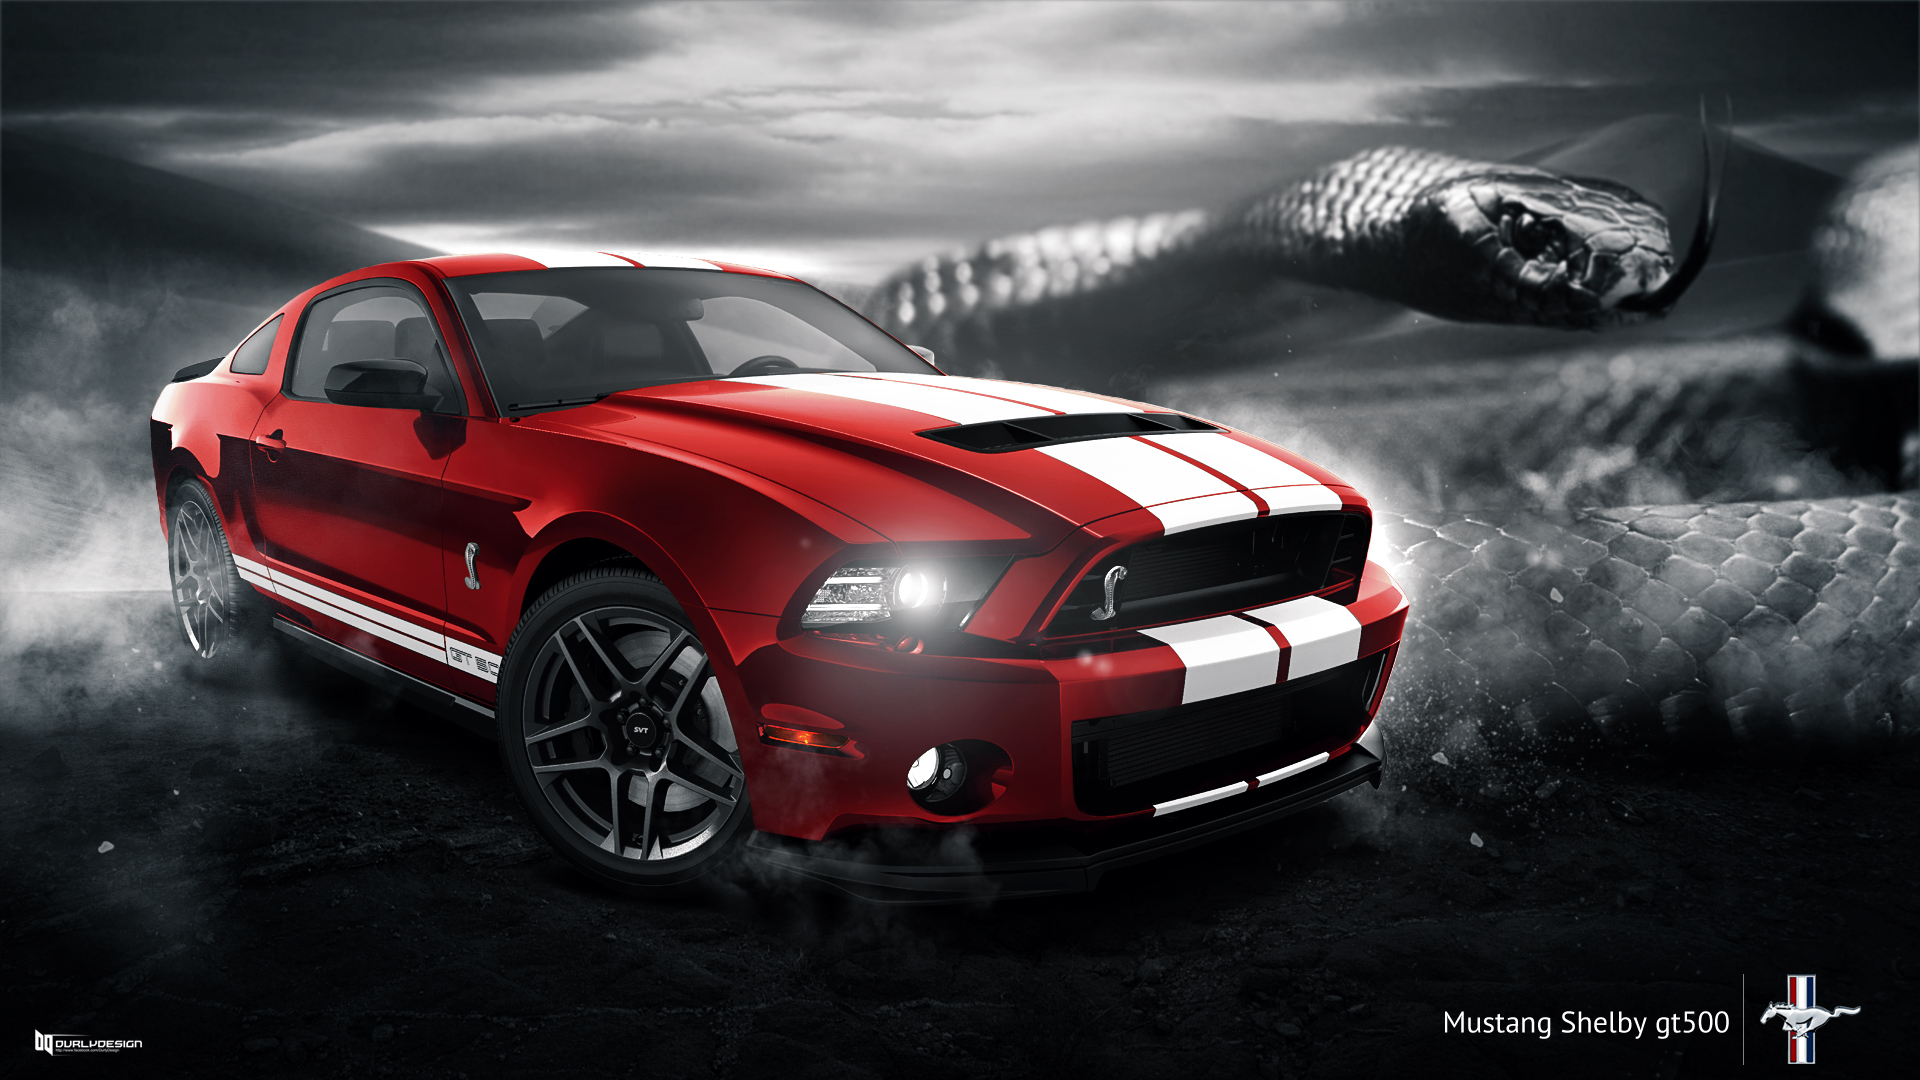 Мустанг шумилова. Красный Ford Mustang gt 500. Ford Mustang Shelby gt500 Red. Ford Mustang Shelby gt500 красный. Форд Мустанг gt 500 красный.